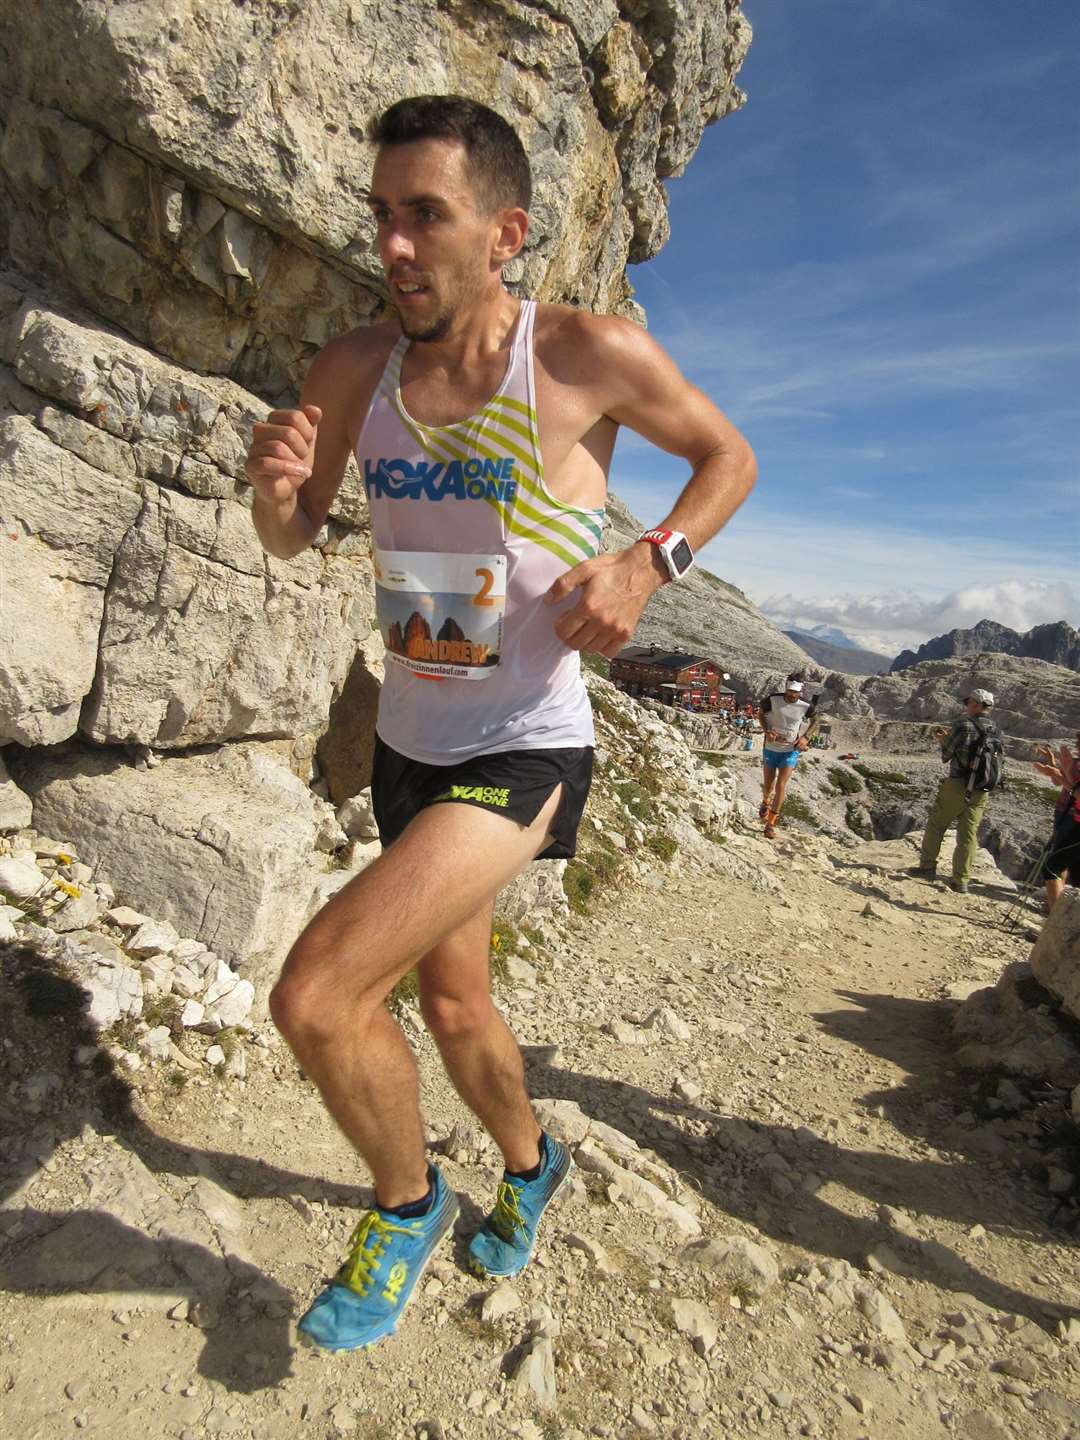 Halkirk mountain runner Andrew Douglas makes his way up the Dolomites in Italy. His fifth-place finish was enough to secure him the World Cup Series title for 2019. Picture: Marco Gulberti / WMRA